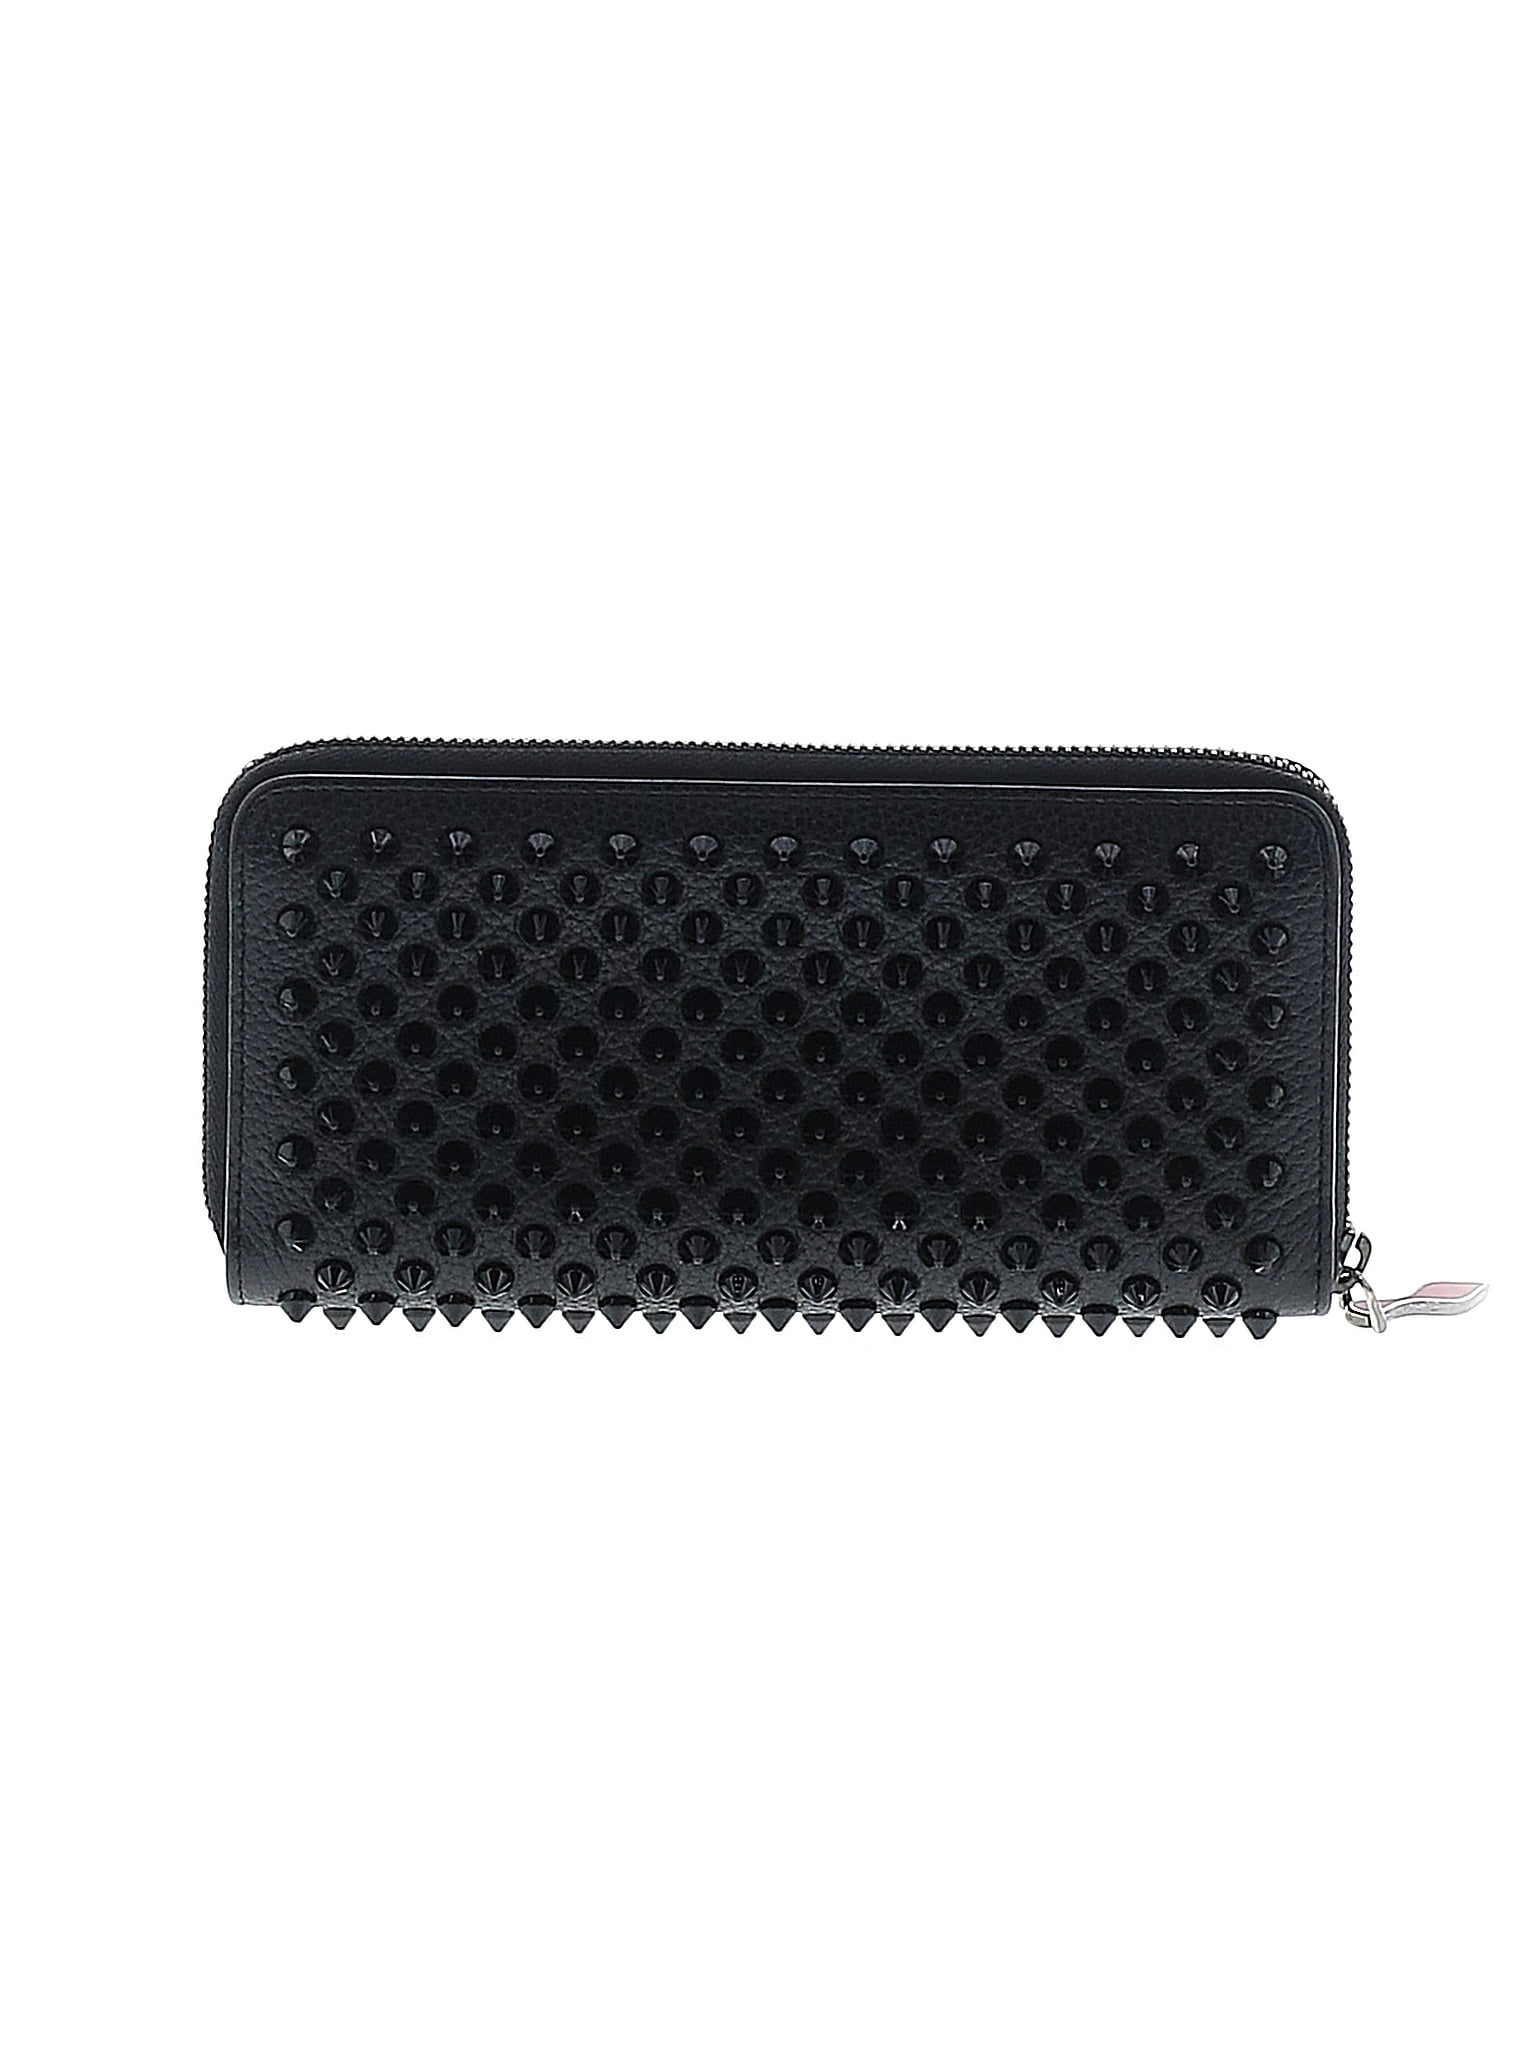 Panettone - Wallet - Calf leather and spikes - Black - Christian Louboutin